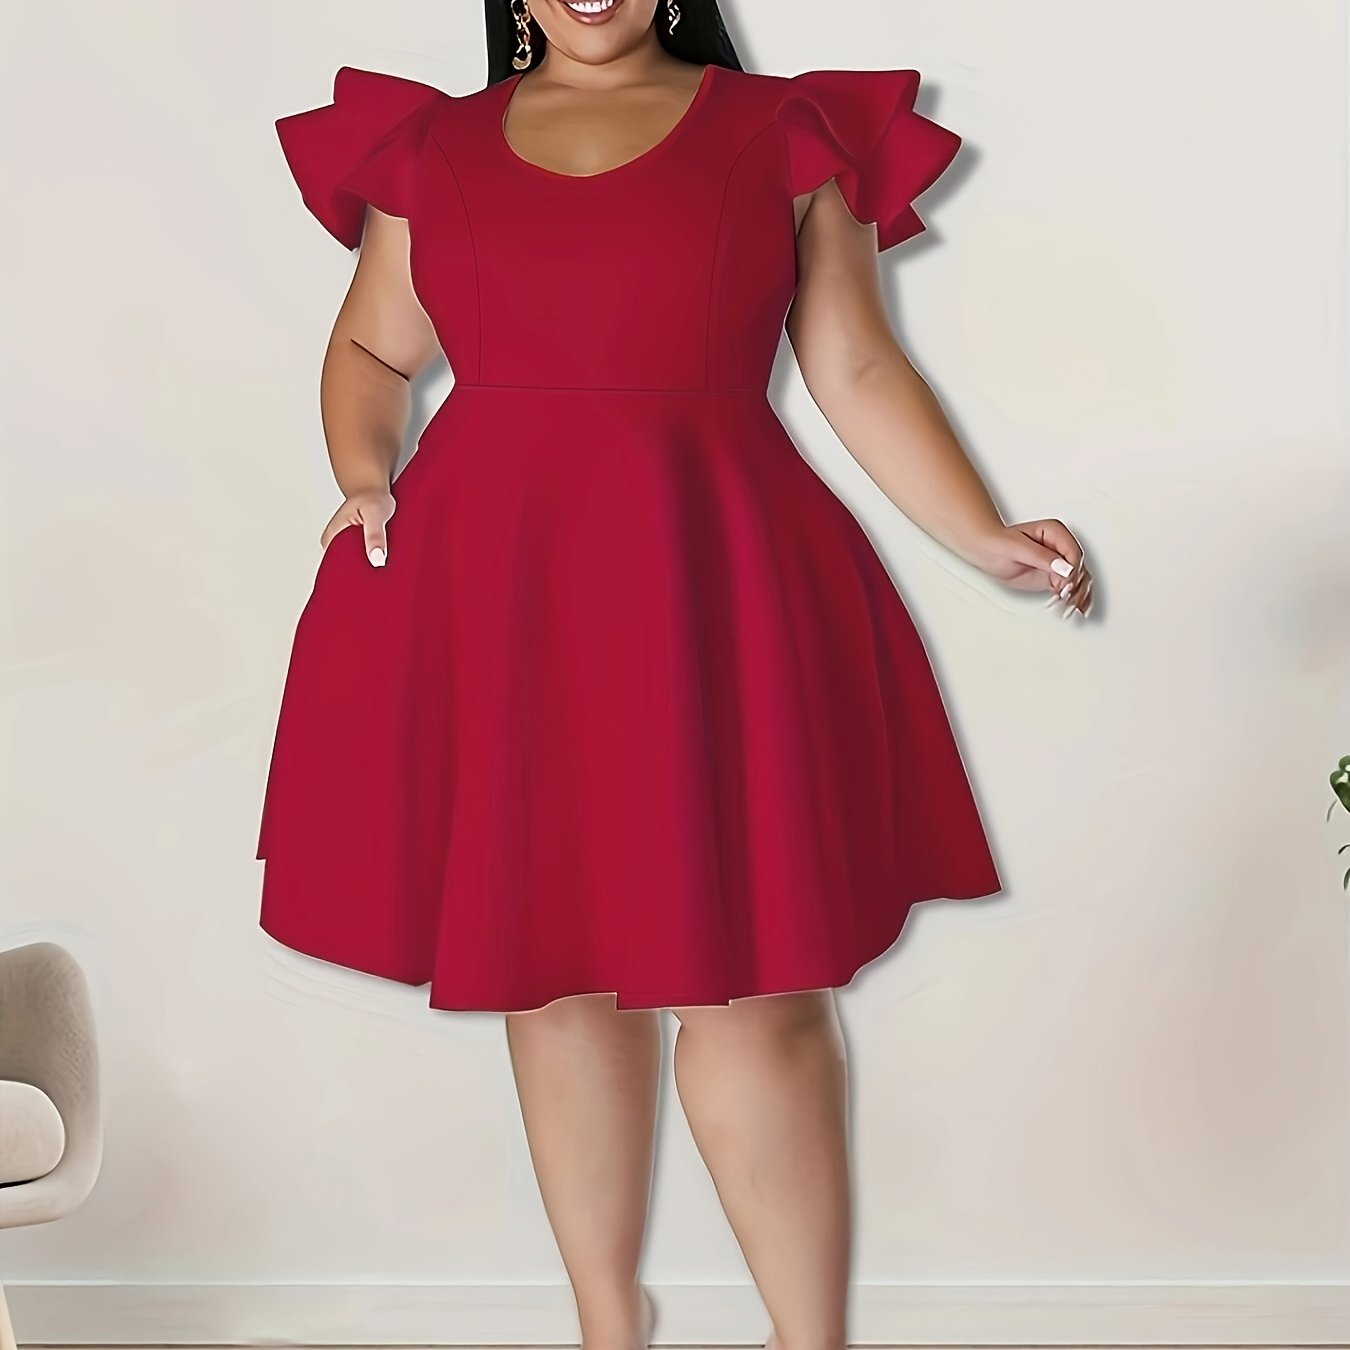 kpoplk Plus Size Dresses for Women,Women's Wedding Guest Dress Ruffle  Dresses Cap Sleeve Fit and Flare A Line Dress with Pocket(Red,S) 